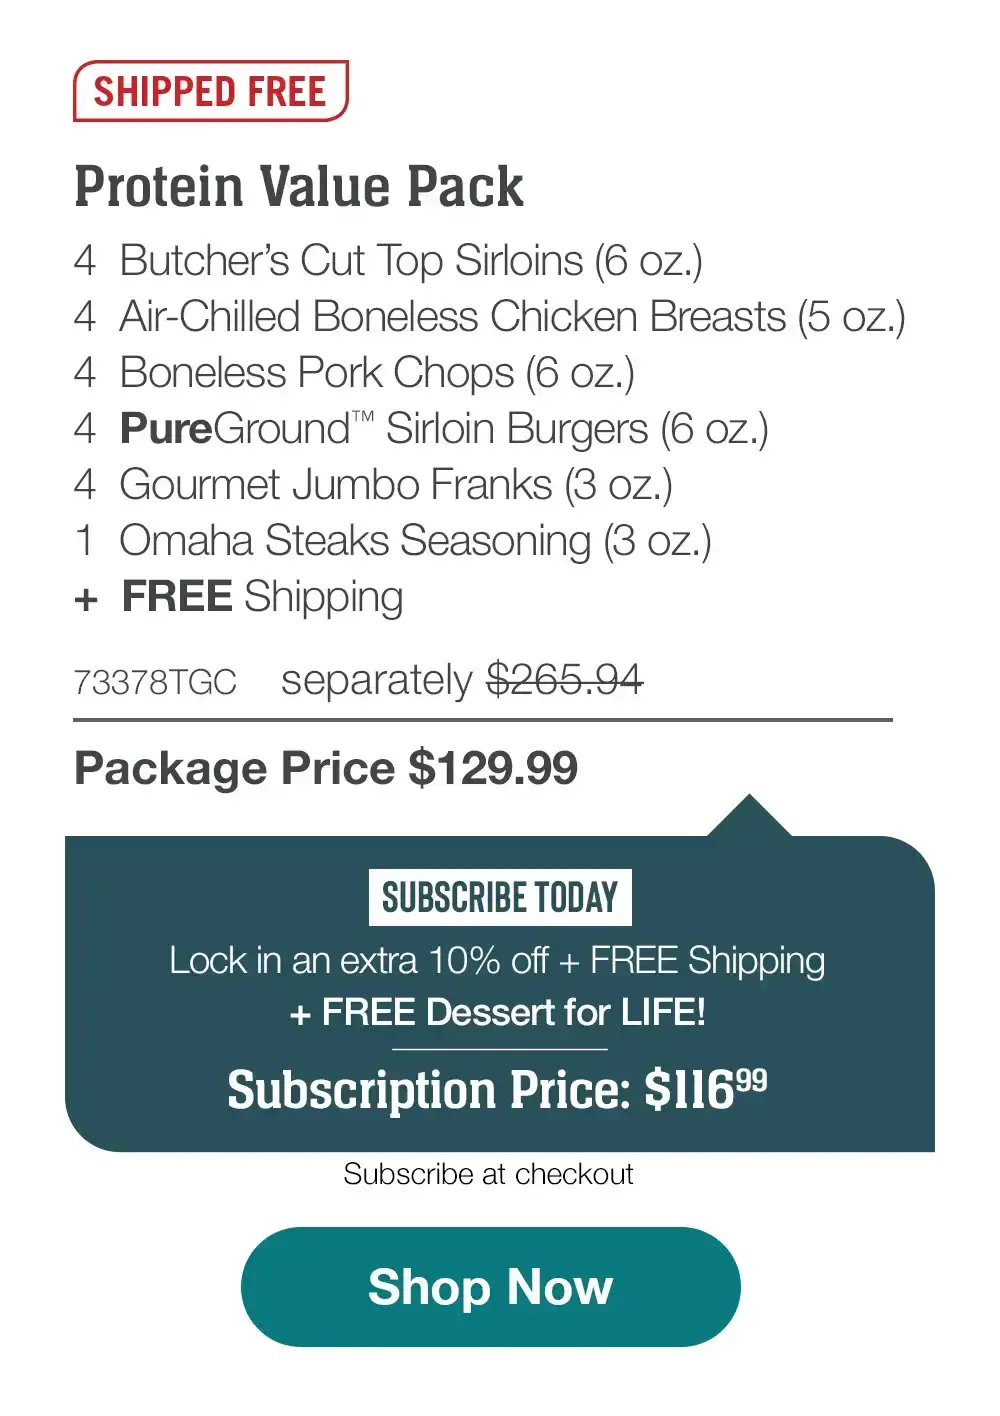 SHIPPED FREE |Protein Value Pack | 4 Butcher's Cut lop Sirloins (6 oz.) | 4 Air-Chilled Boneless Chicken Breasts (5 oz.) | 4 Boneless Pork Chops (6 oz.) |4 PureGround Sirloin Burgers (6 oz.) | 4 Gourmet Jumbo Franks (3 oz.) | 1 Omaha Steaks Seasoning (3 oz.) plus, FREE Shipping | 73378TGC separately \\$265.94 | Package Price \\$129.99 | SUBSCRIBE TODAY | Lock in an extra 10% off + FREE Shipping plus, FREE Dessert for LIFE! | Subscription Price: \\$116.99 | Subscribe at checkout |Shop Now